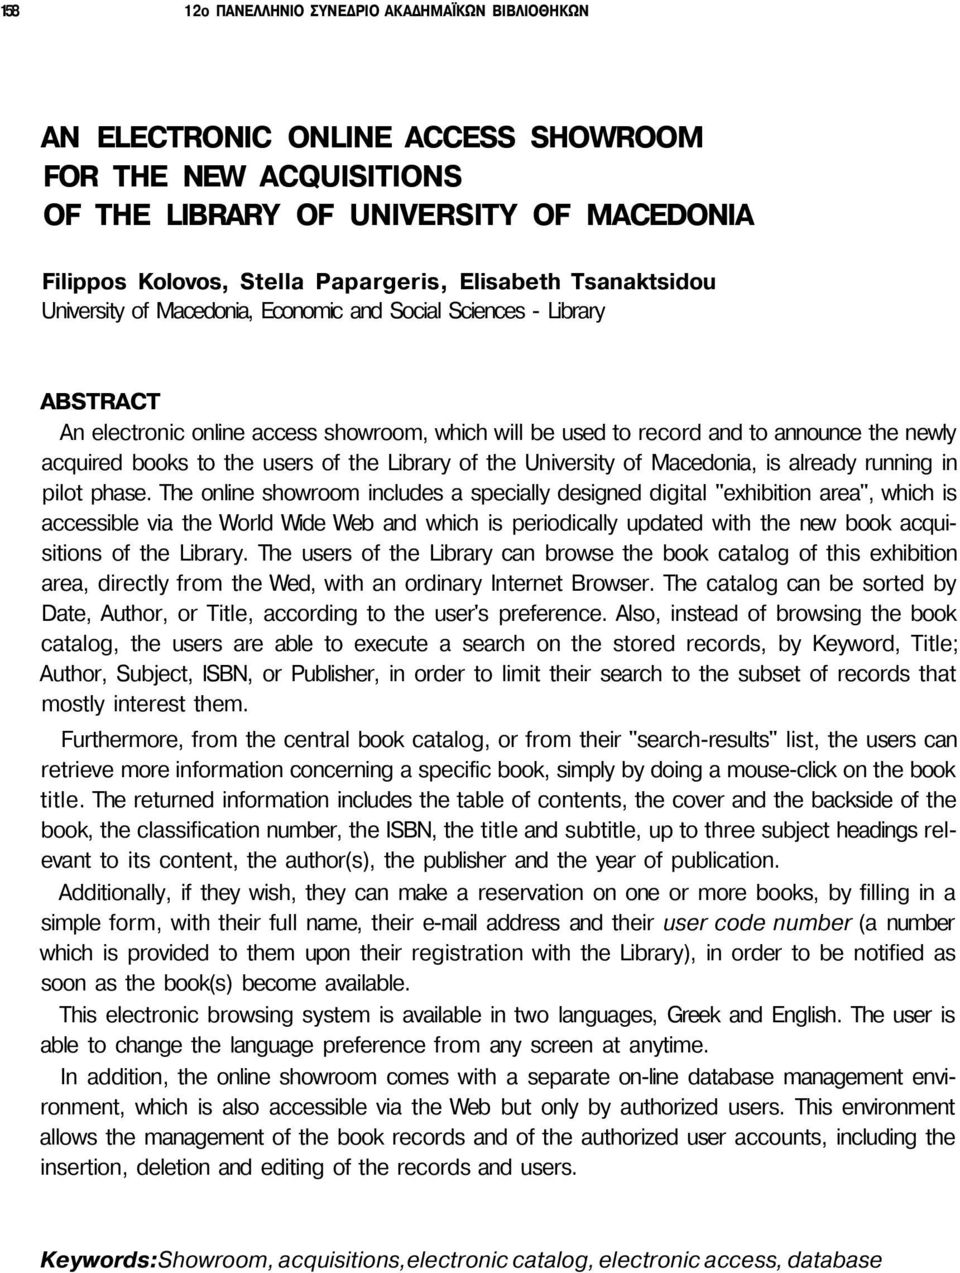 books to the users of the Library of the University of Macedonia, is already running in pilot phase.